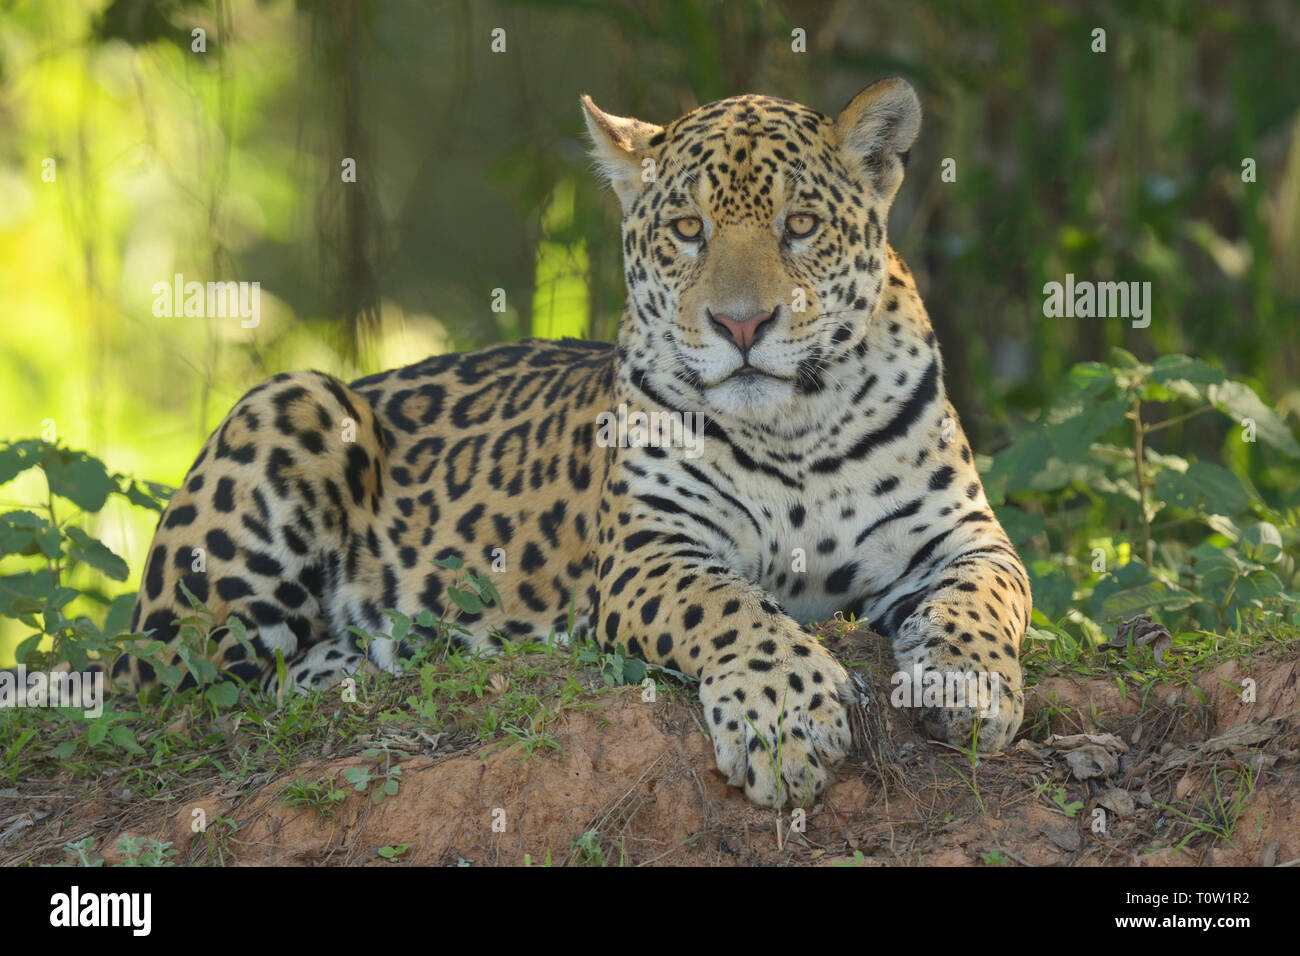 Young jaguar (Panthera once) in Brazil Stock Photo